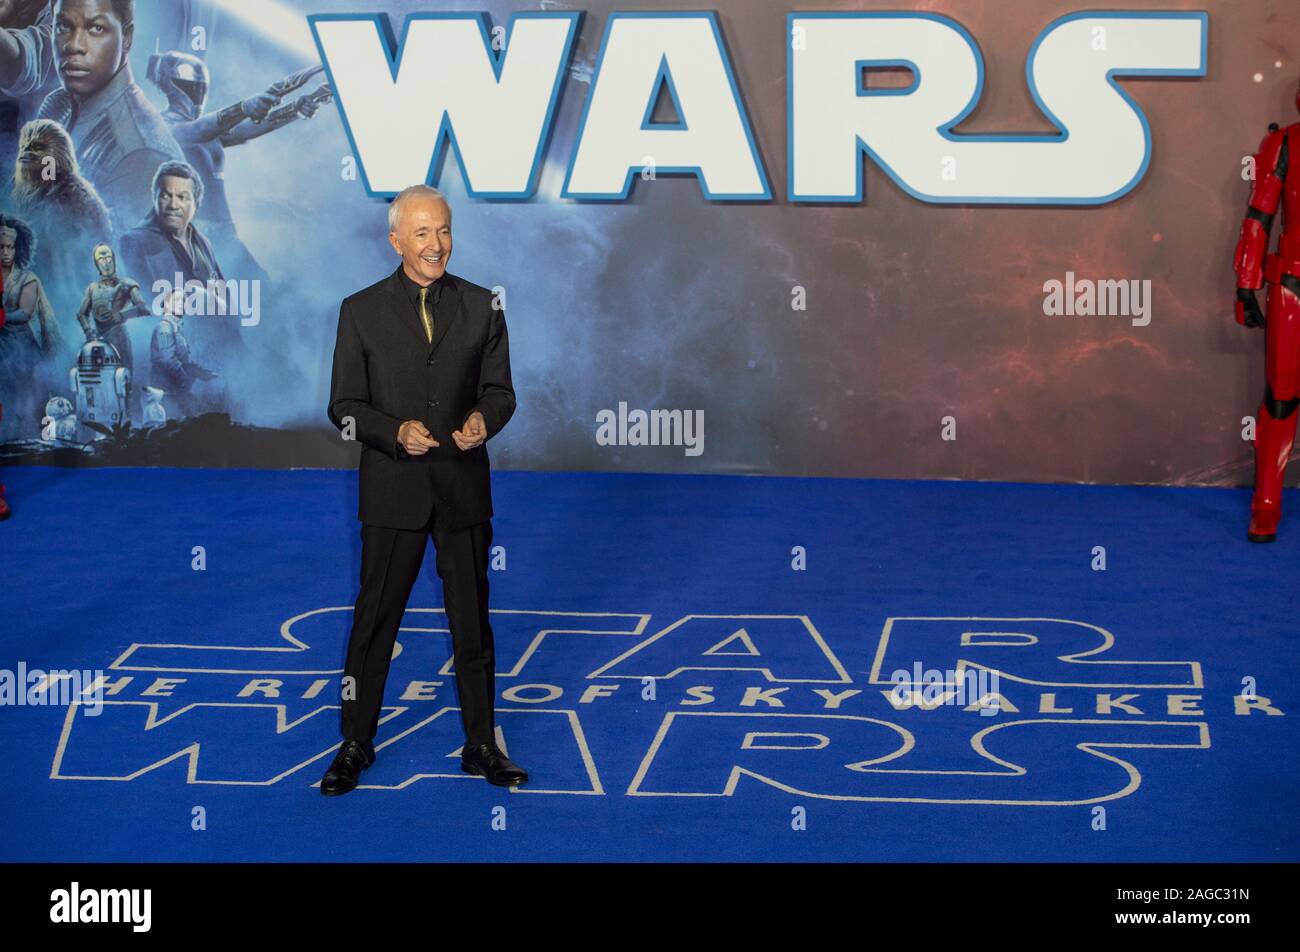 London, UK. 18th Dec, 2019. LONDON, ENGLAND - DECEMBER 18: Anthony Daniels attends the European Premiere of 'Star Wars: The Rise of Skywalker' at Cineworld Leicester Square on December 18, 2019 in London, England. Credit: Gary Mitchell, GMP Media/Alamy Live News Stock Photo